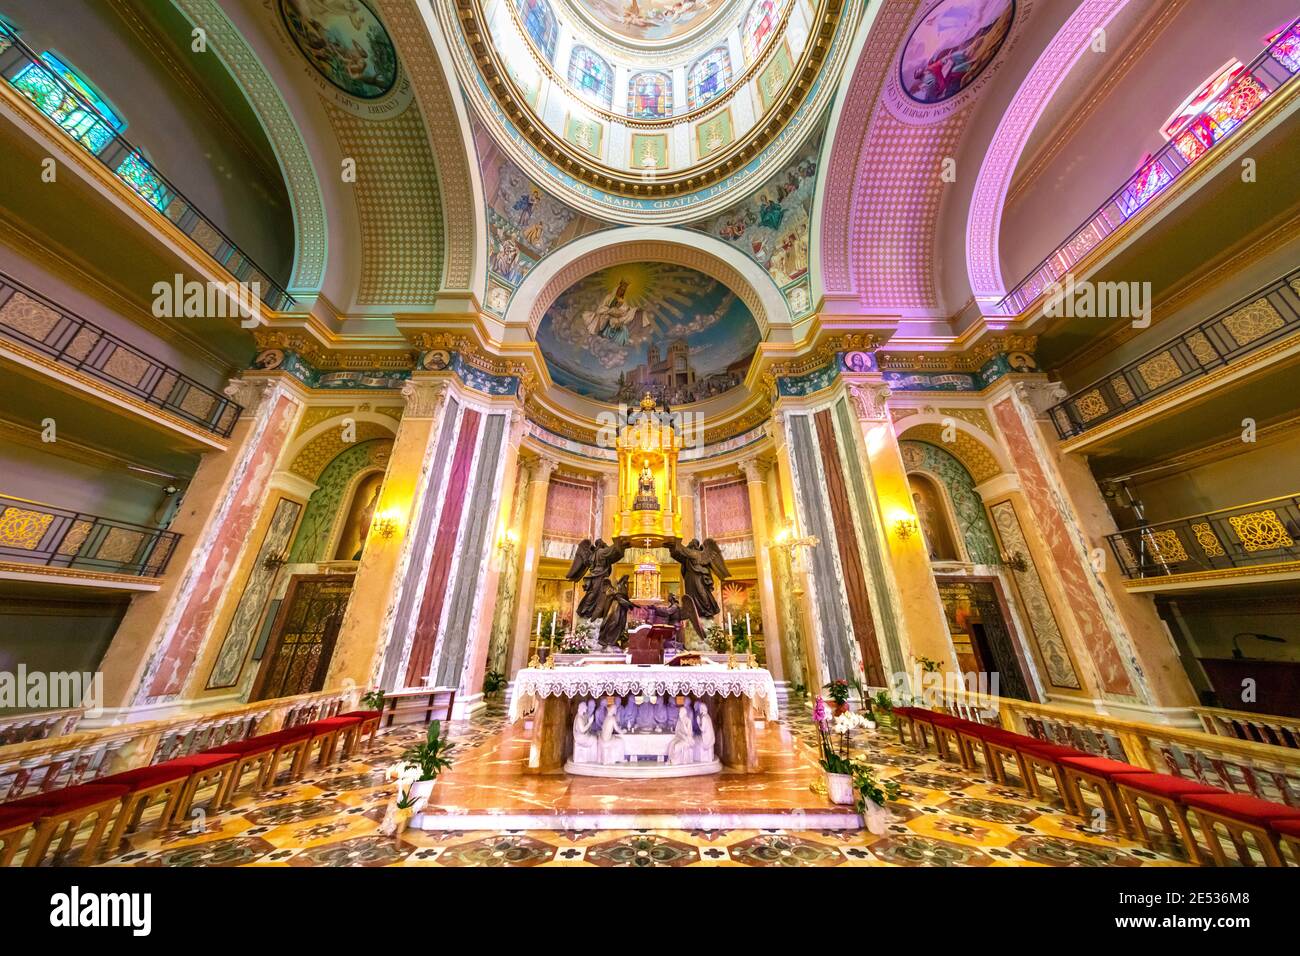 Symmetrical wide angle view of the apse of a colorful baroque Sicilian cathedral Stock Photo